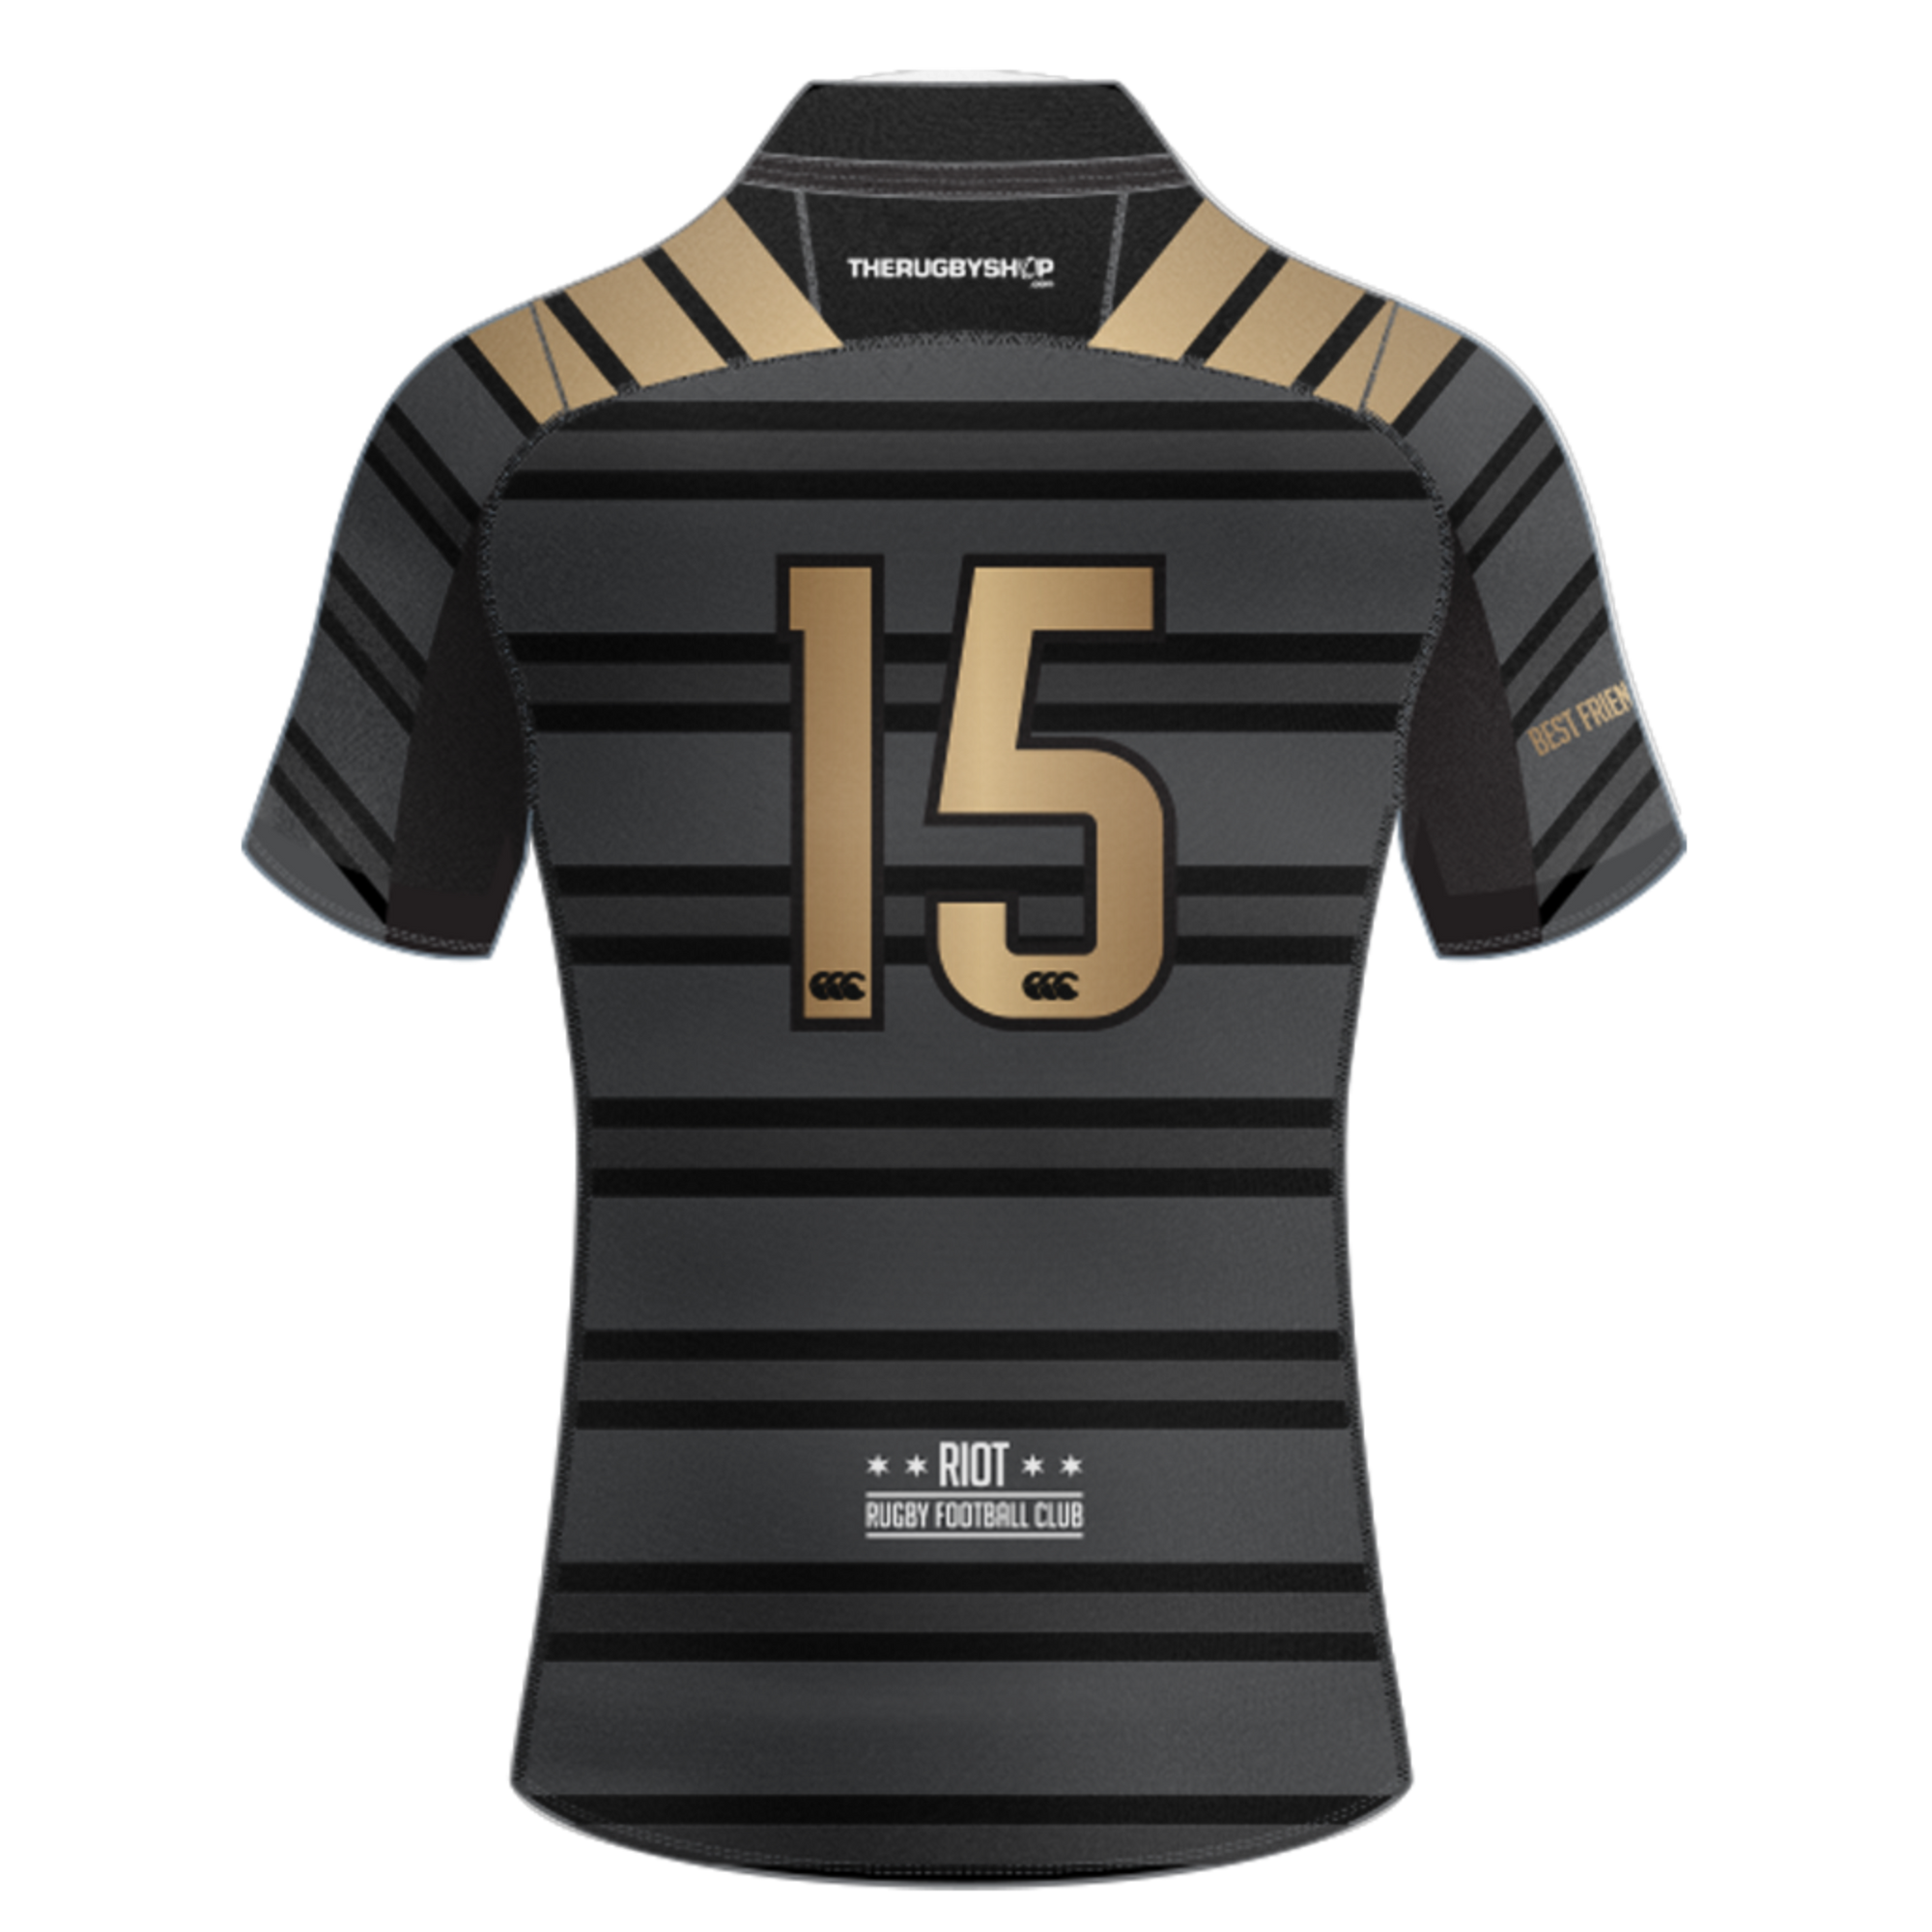 Canterbury CCC Chicago Riot 2021 Replica Rugby Shirt, Black/Gold Unisex Sizing S - 3XL